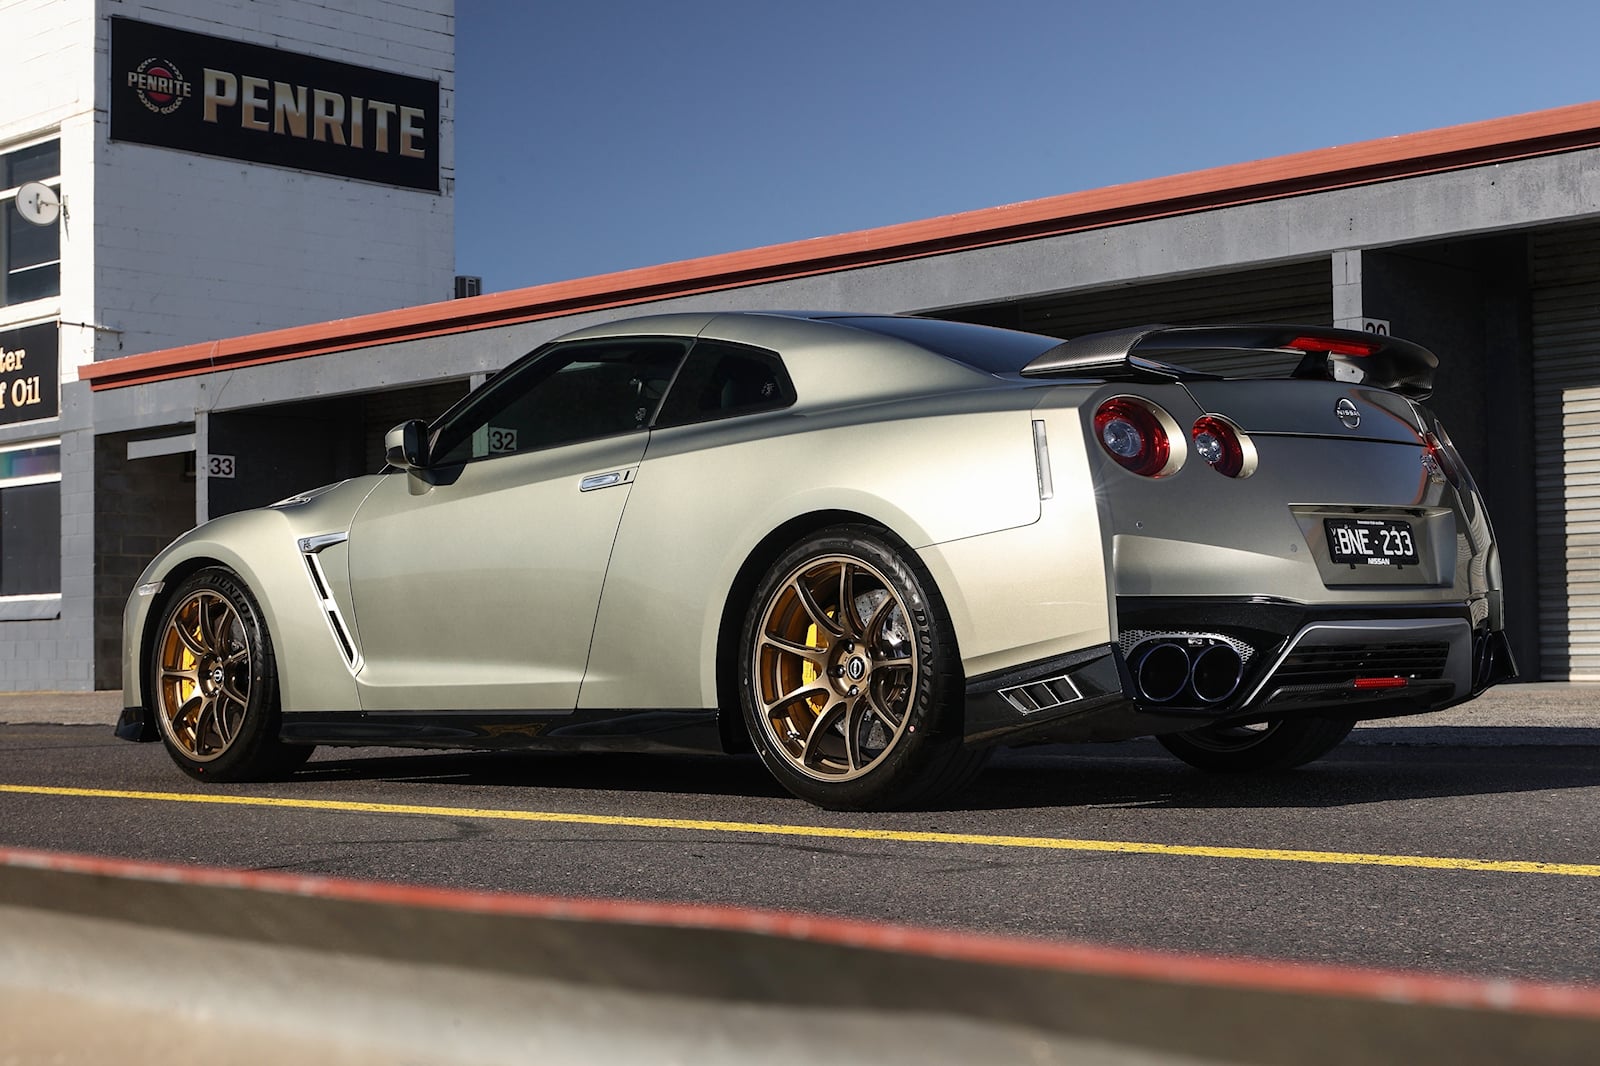 Has The Nissan GT-R Reached The End Of The Road?